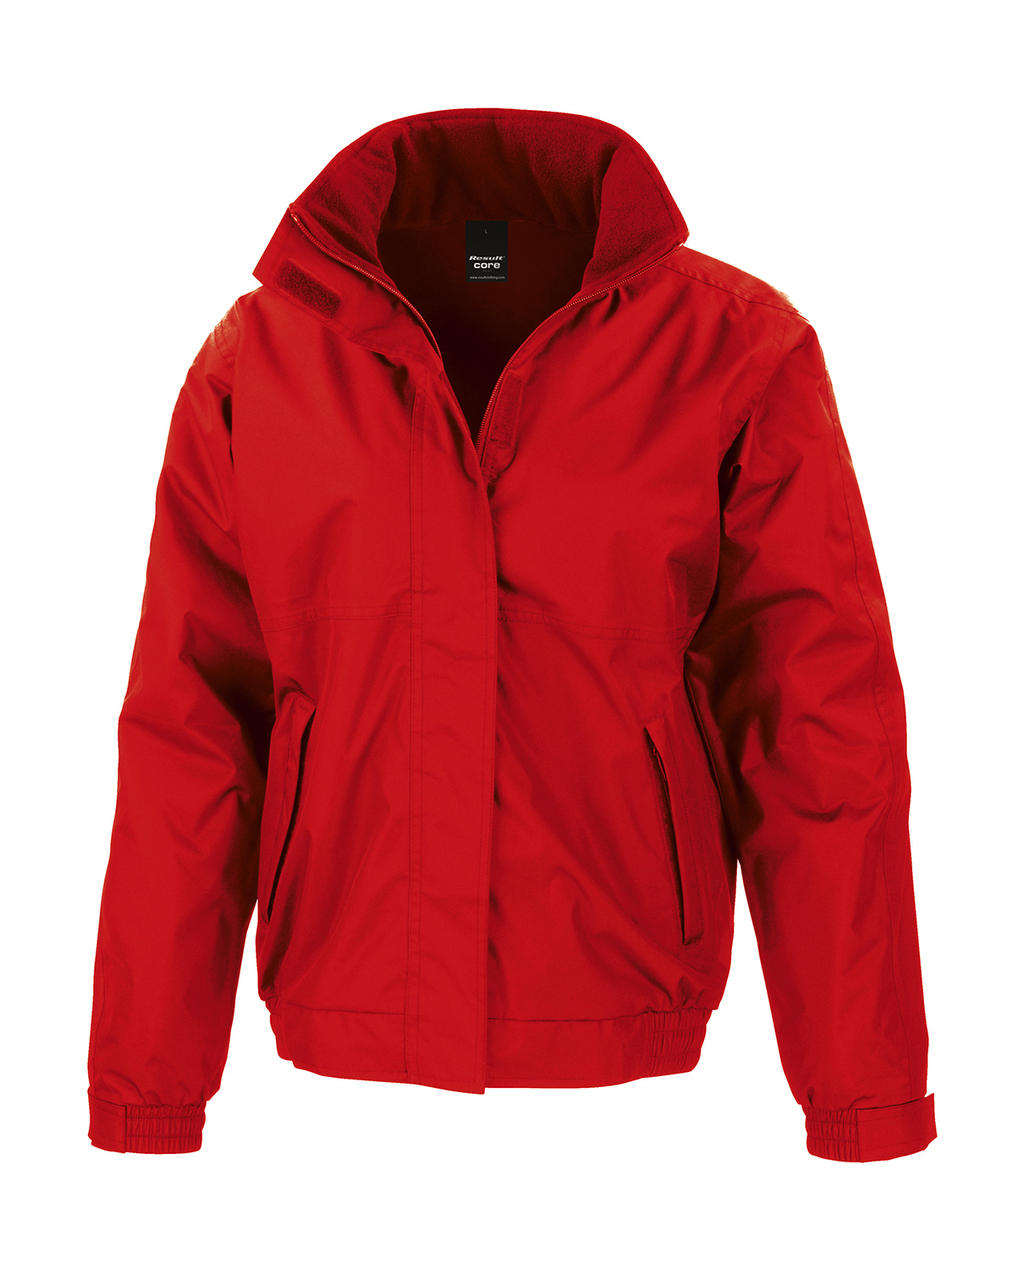  Channel Jacket in Farbe Red